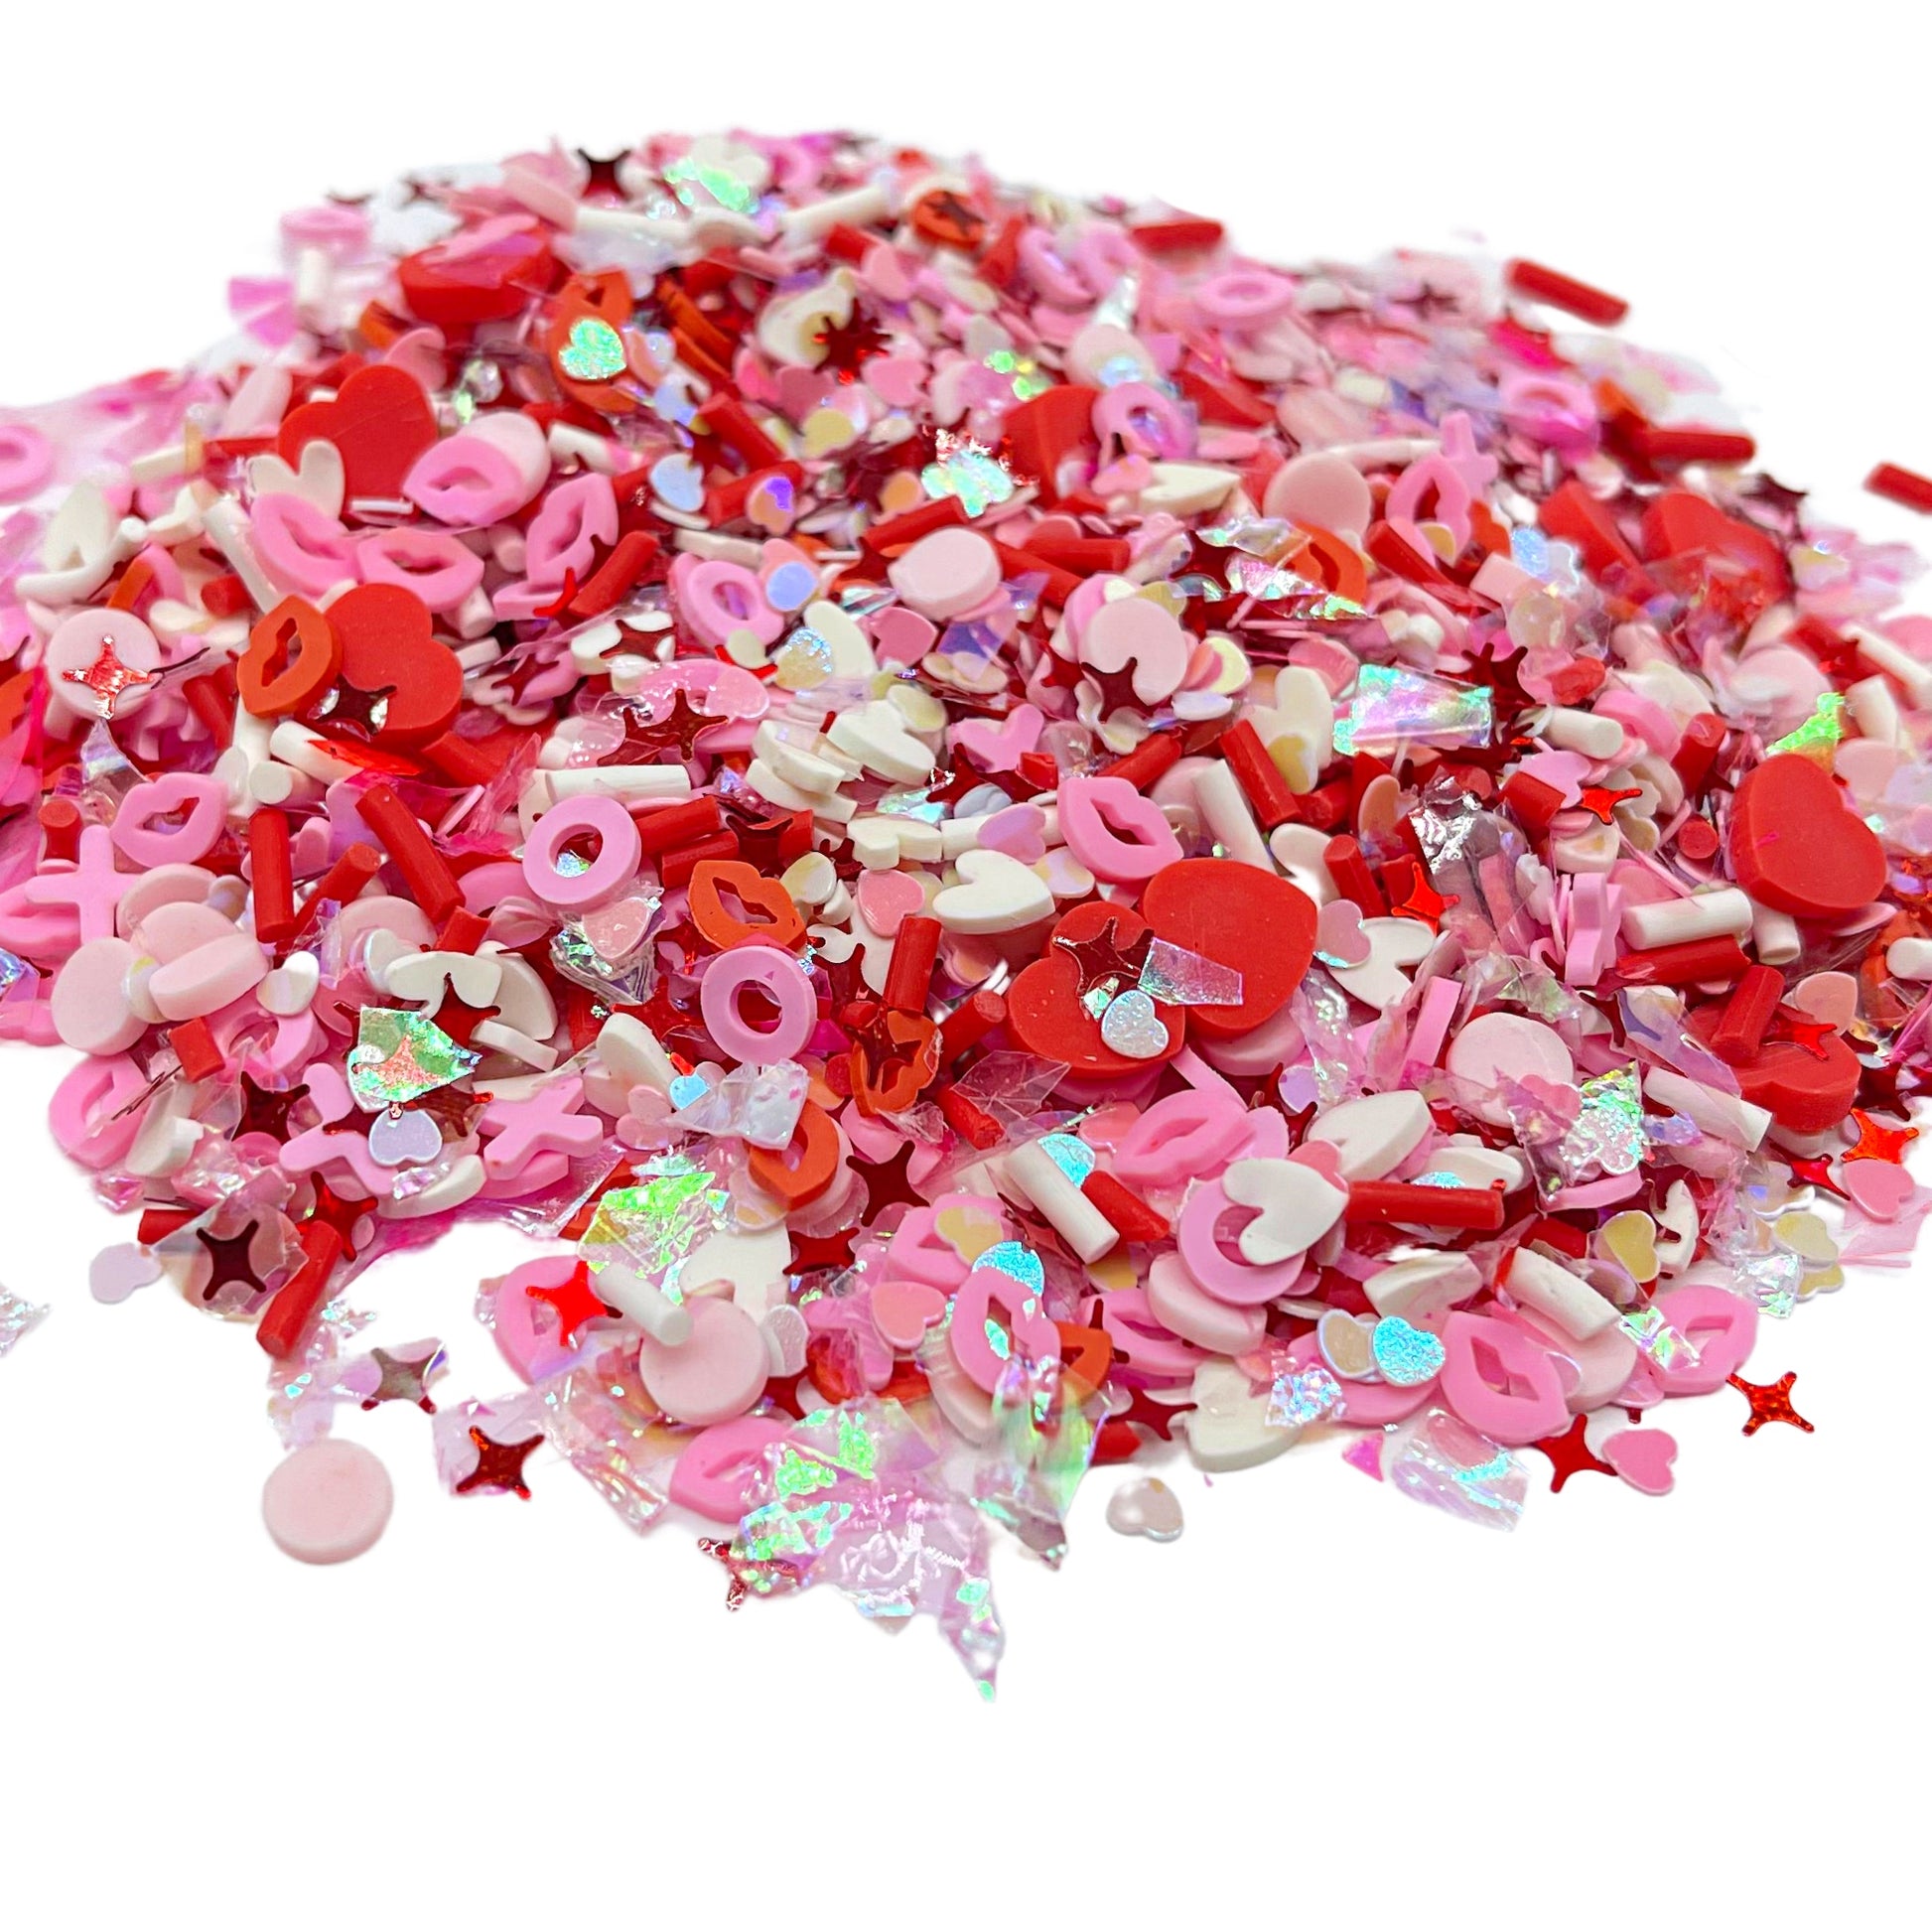 Valentine polymer clay slices mix with red hearts, pink xs and os, white hearts, red sprinkles, and sequin hearts and sparkles poured out of bag.